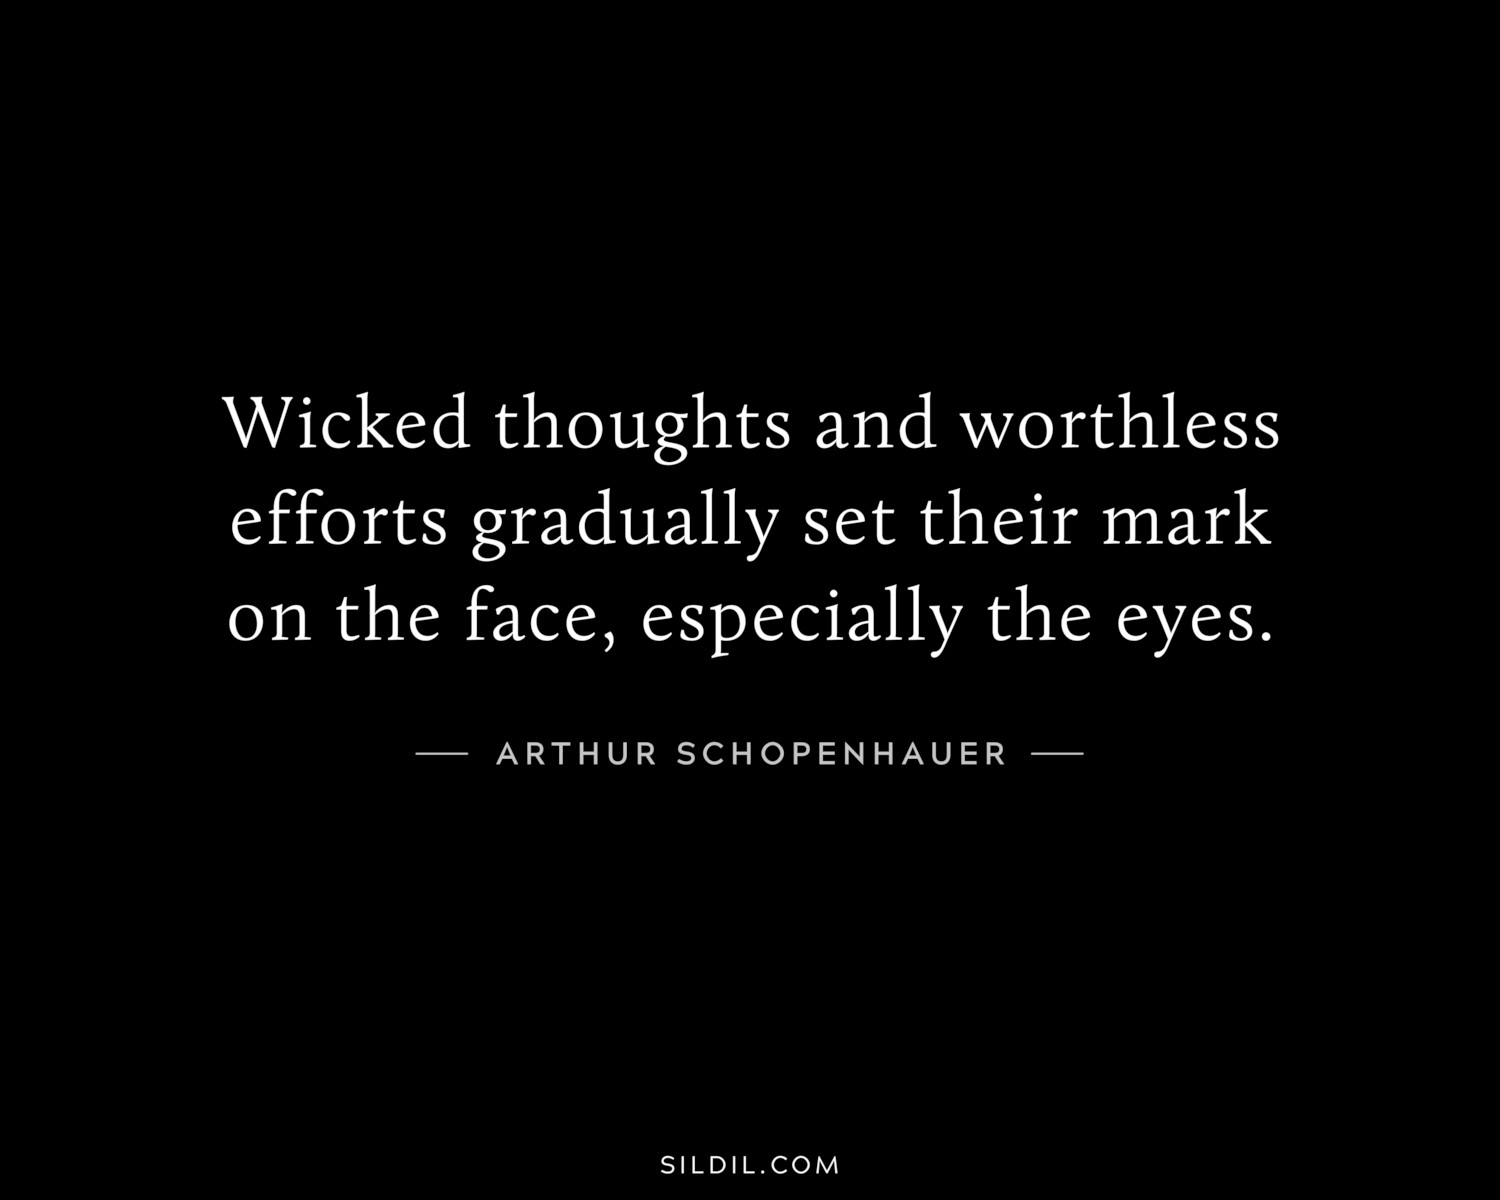 Wicked thoughts and worthless efforts gradually set their mark on the face, especially the eyes.